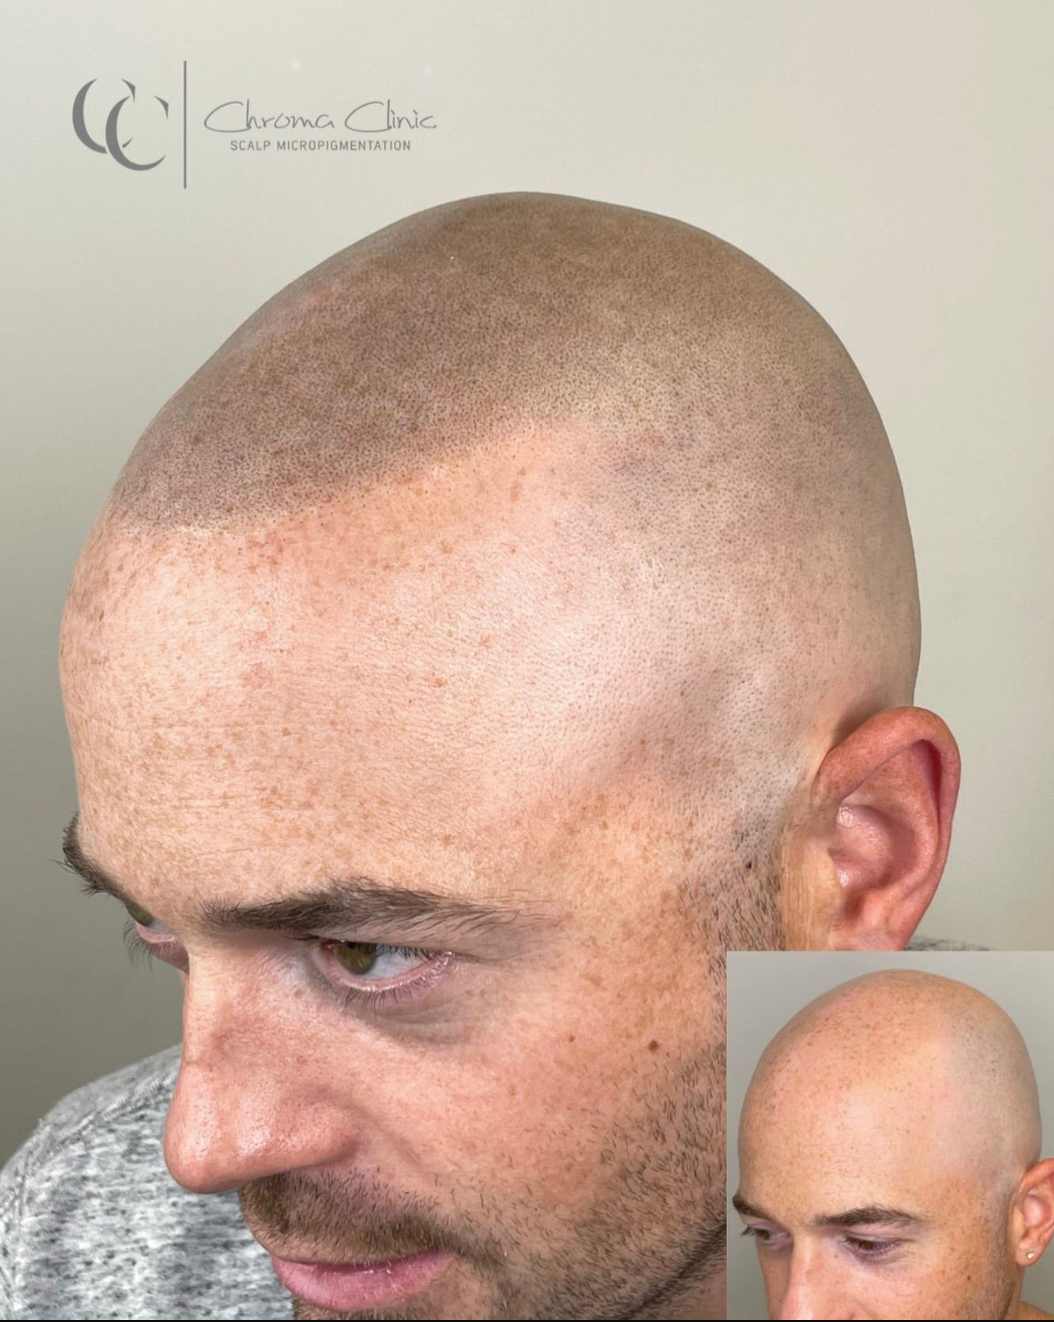 vancouver SMP before and after chroma clinic Scalp micropigmentation